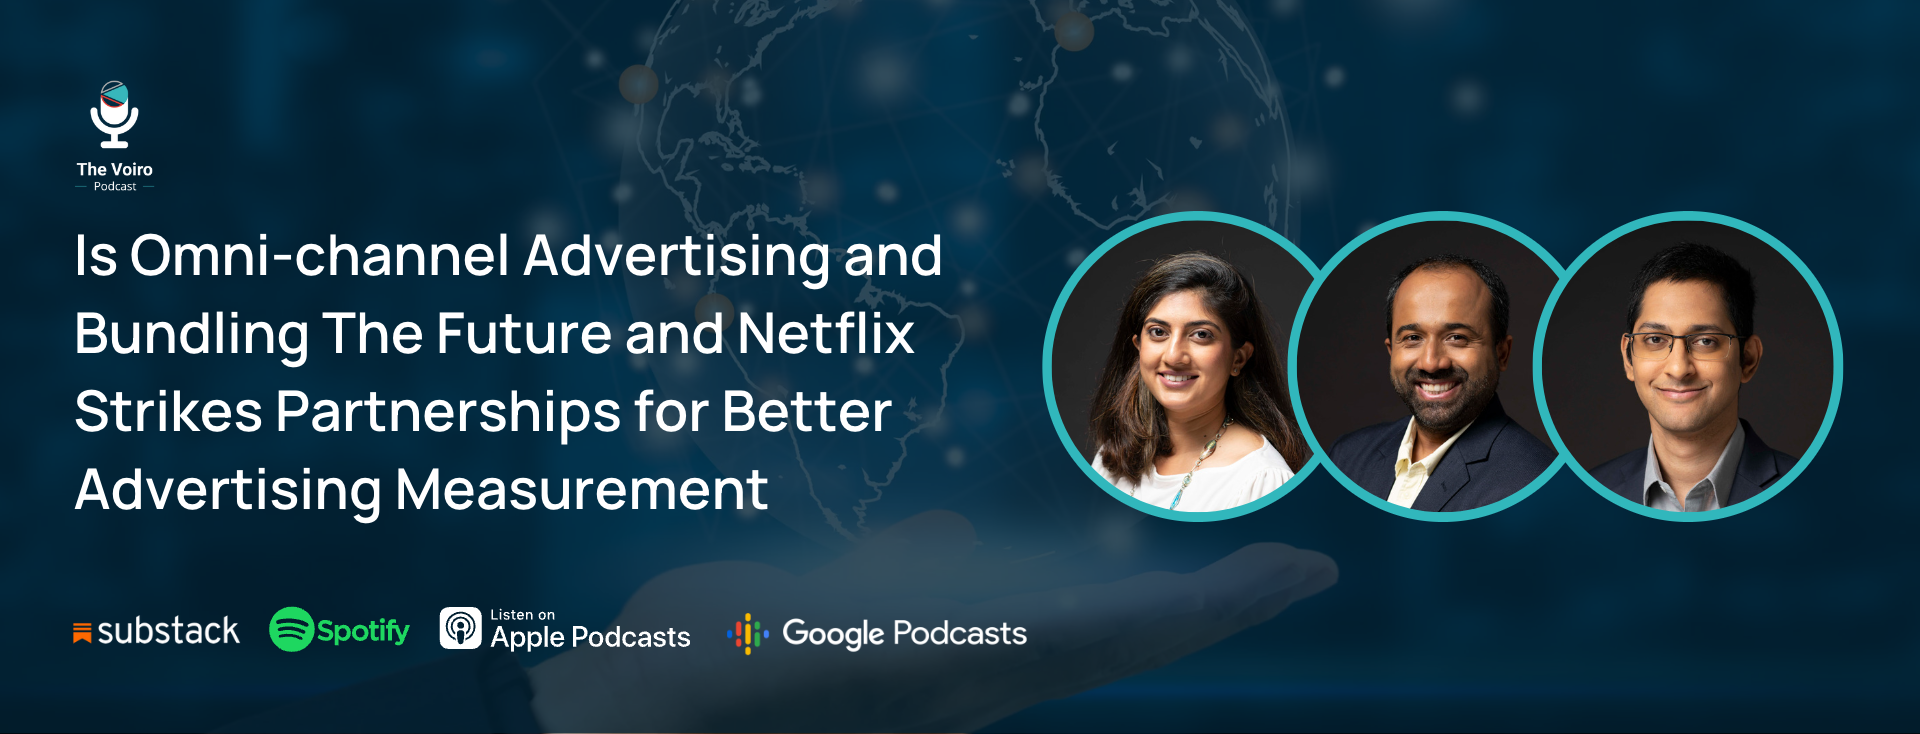 Is Omni-channel Advertising and Bundling The Future and Netflix Strikes Partnerships for Better Advertising Measurement - The Voiro Podcast